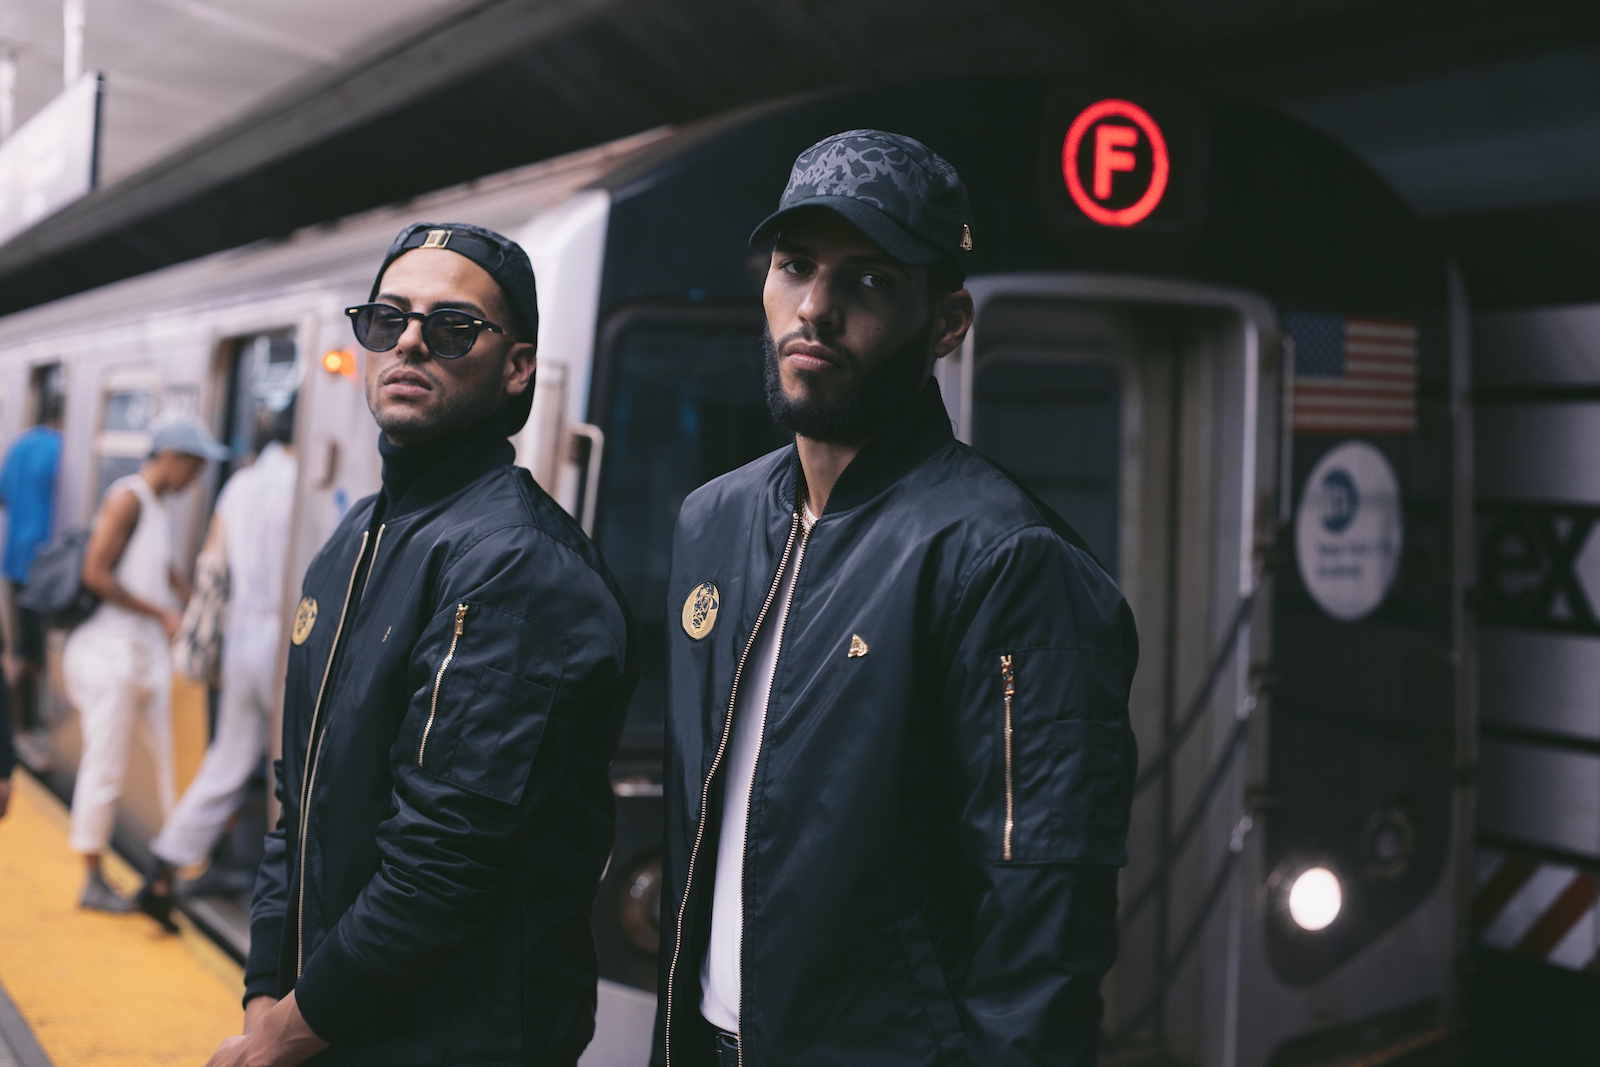 Martinez Brothers - Just Music Festival - Rome